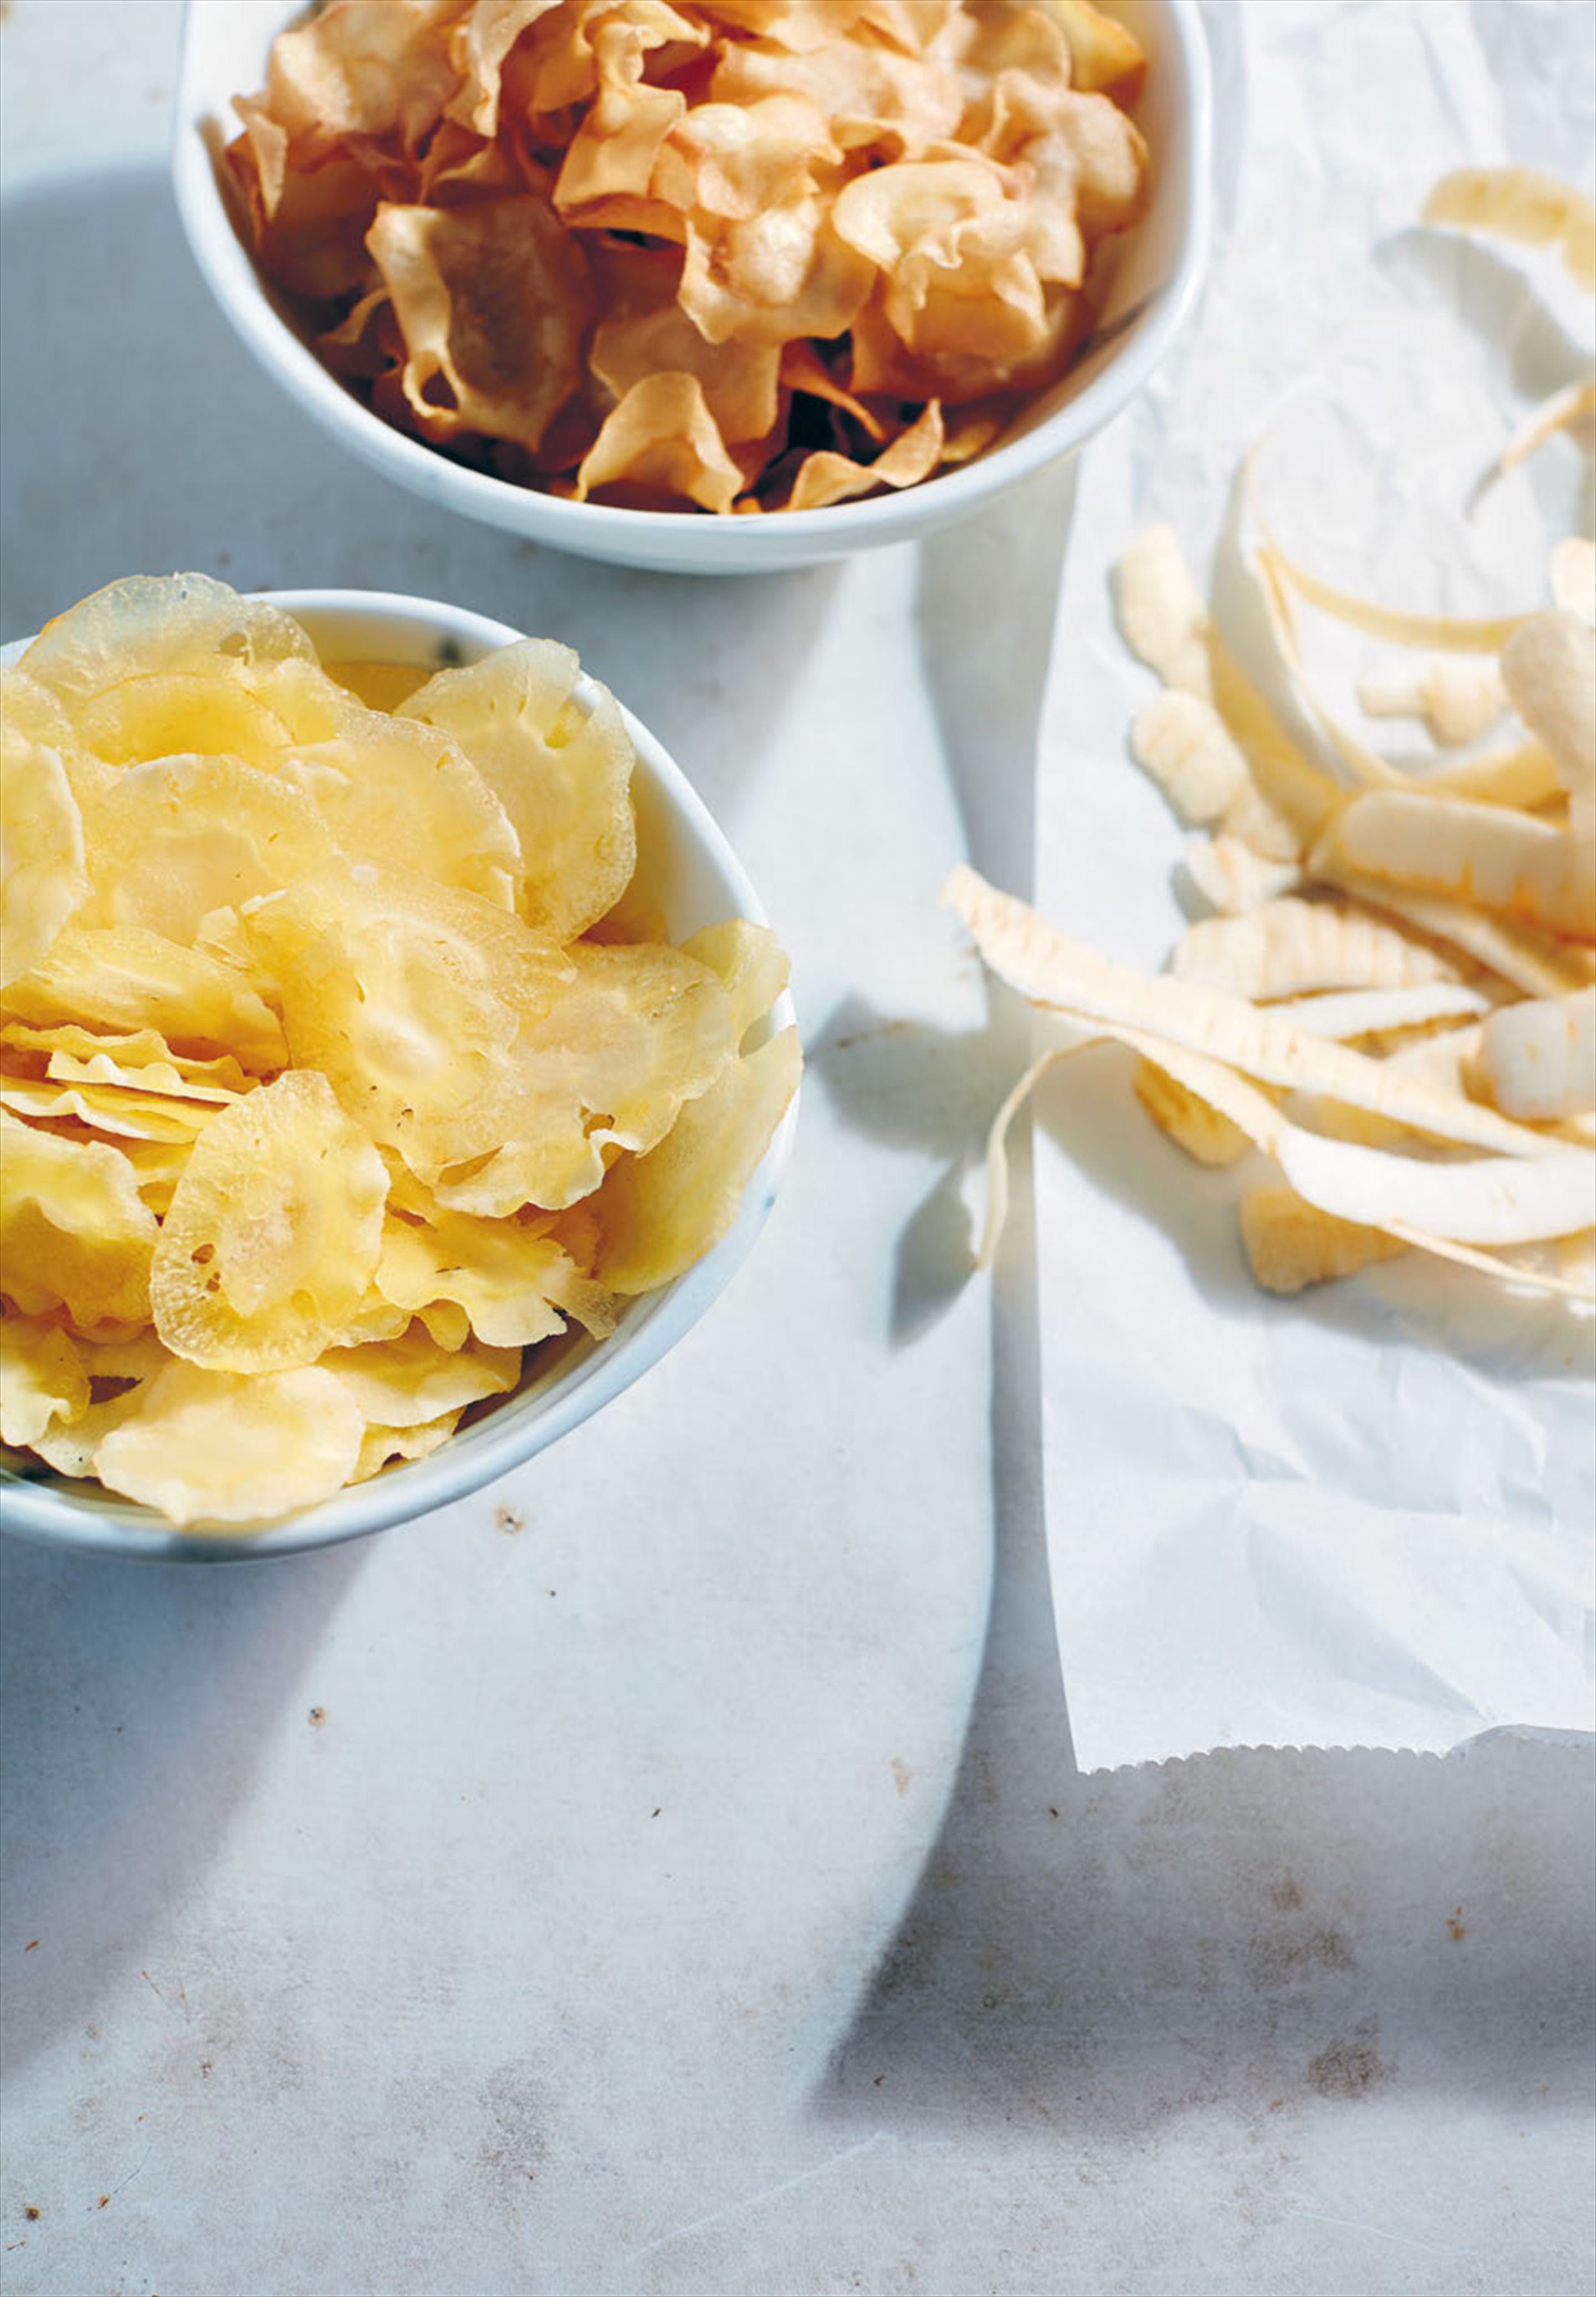 Sweet and savoury parsnip chips